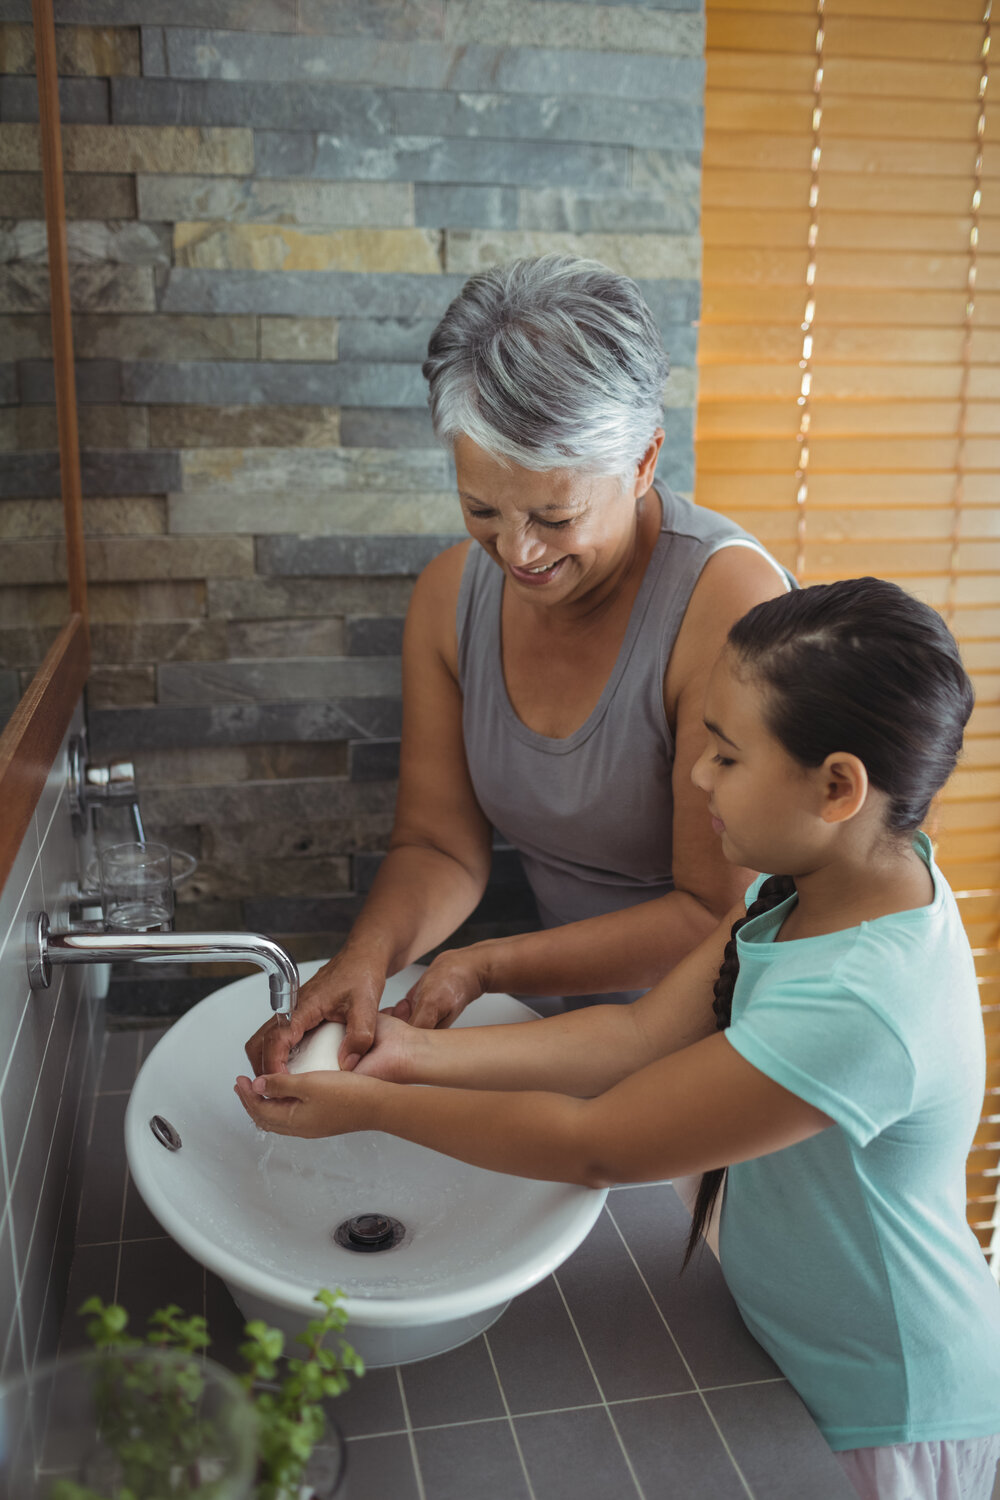 Grandmother and granddaughter washing hands in bathroom sink at home, Coronavirus hand washing for clean hands hygiene Covid19 spread prevention.